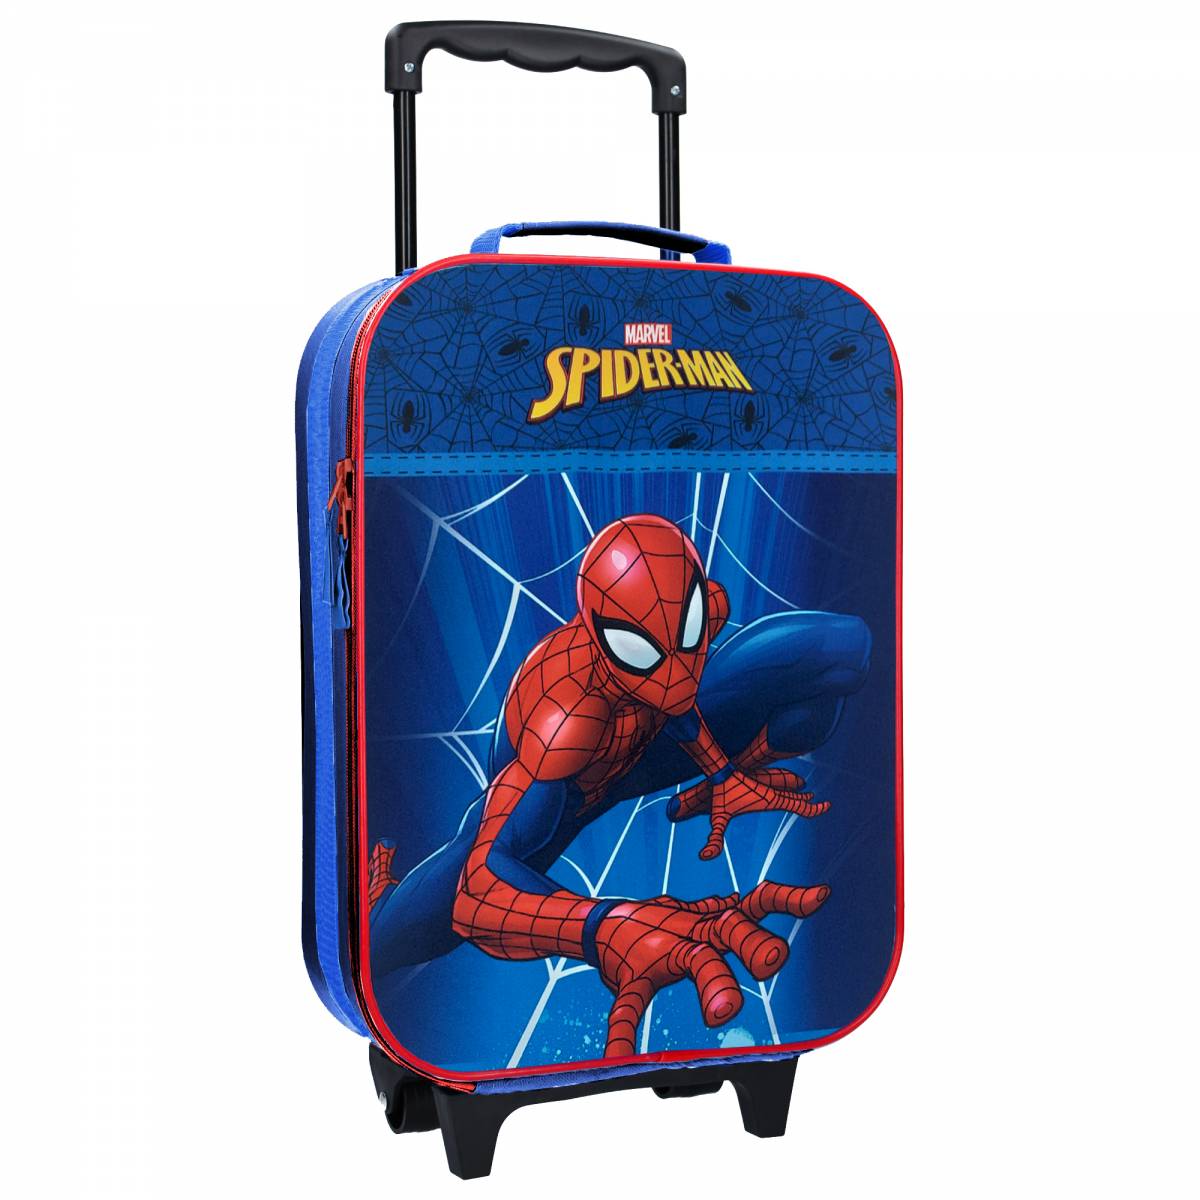 Trolley suitcase Spider-Man The Star Show Of